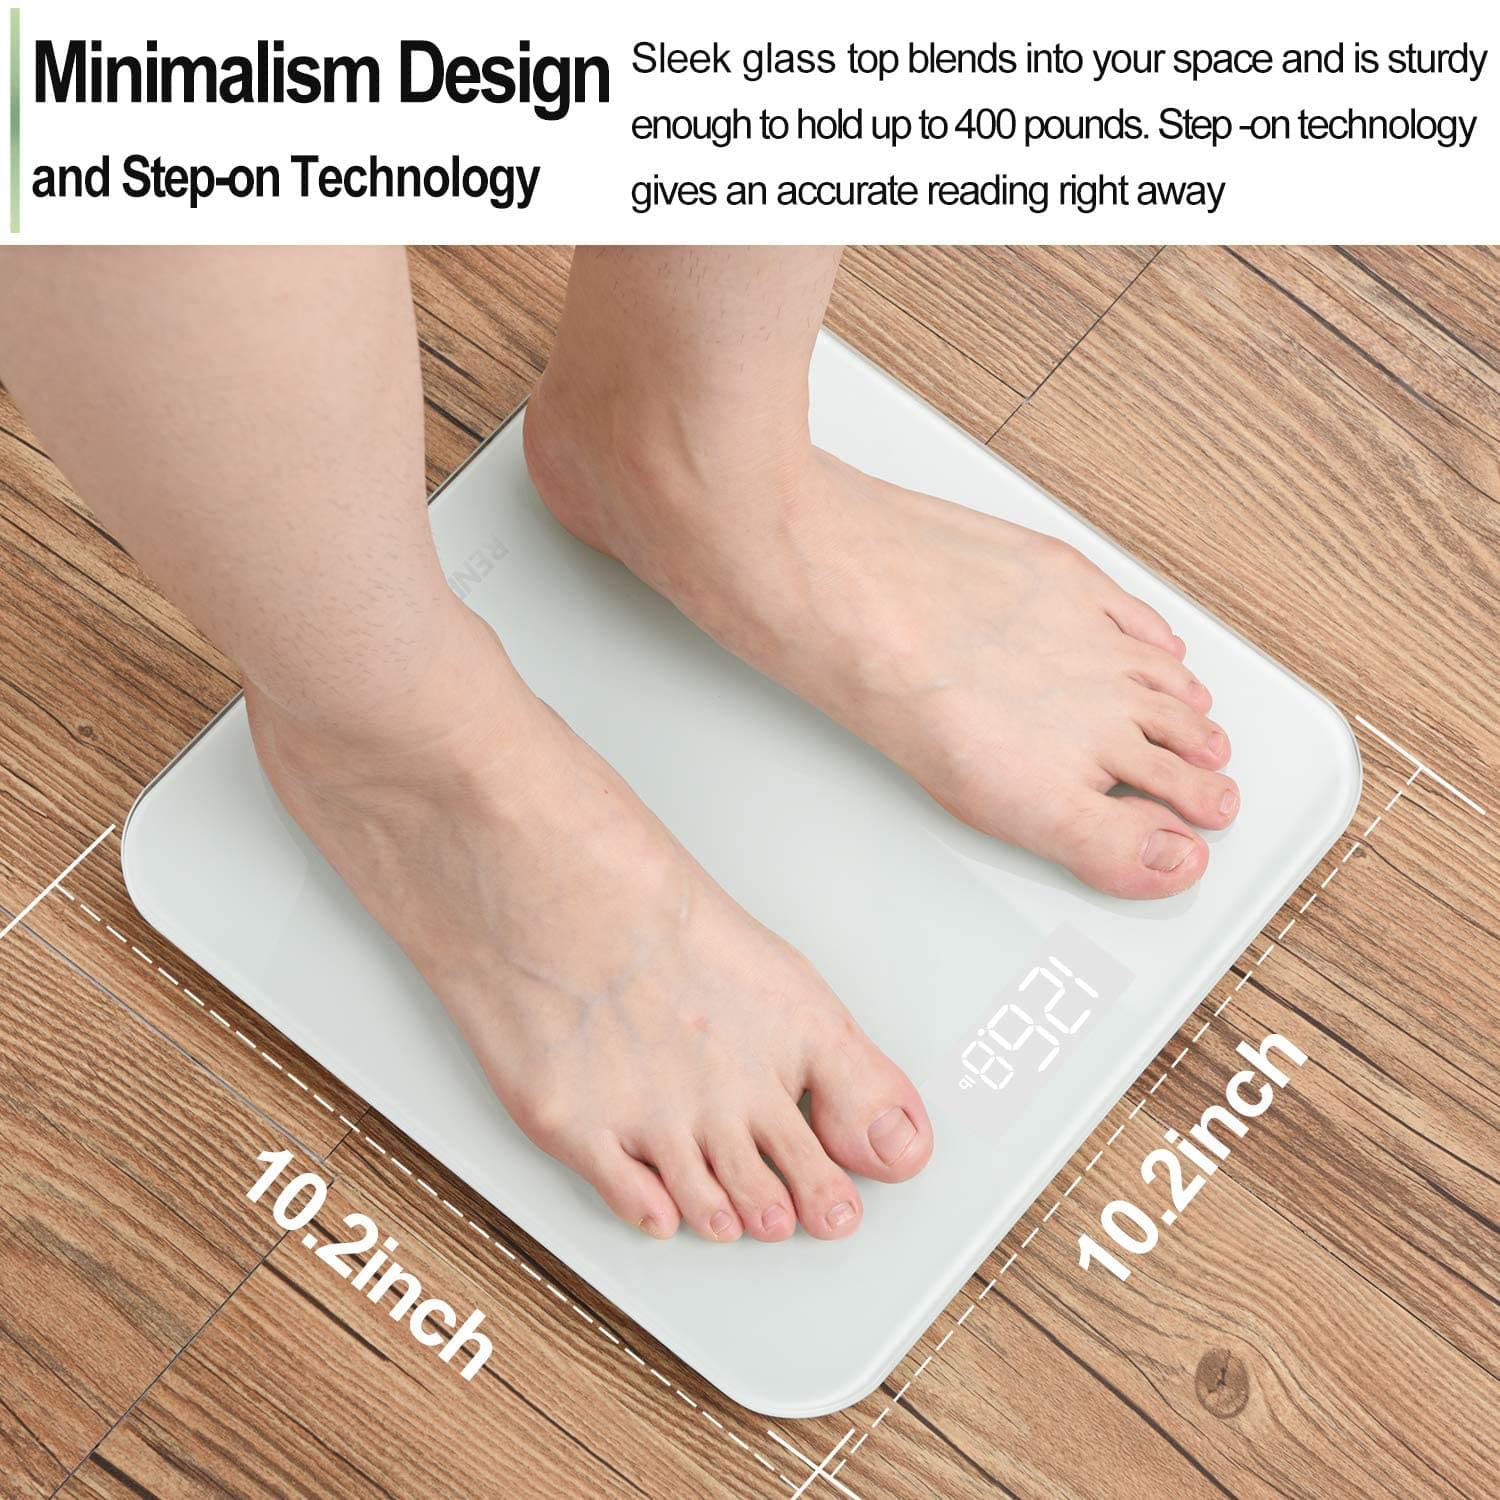 Digital Body Weight Scale, Bathroom Weighing Scale Large LED Display, 400  lbs